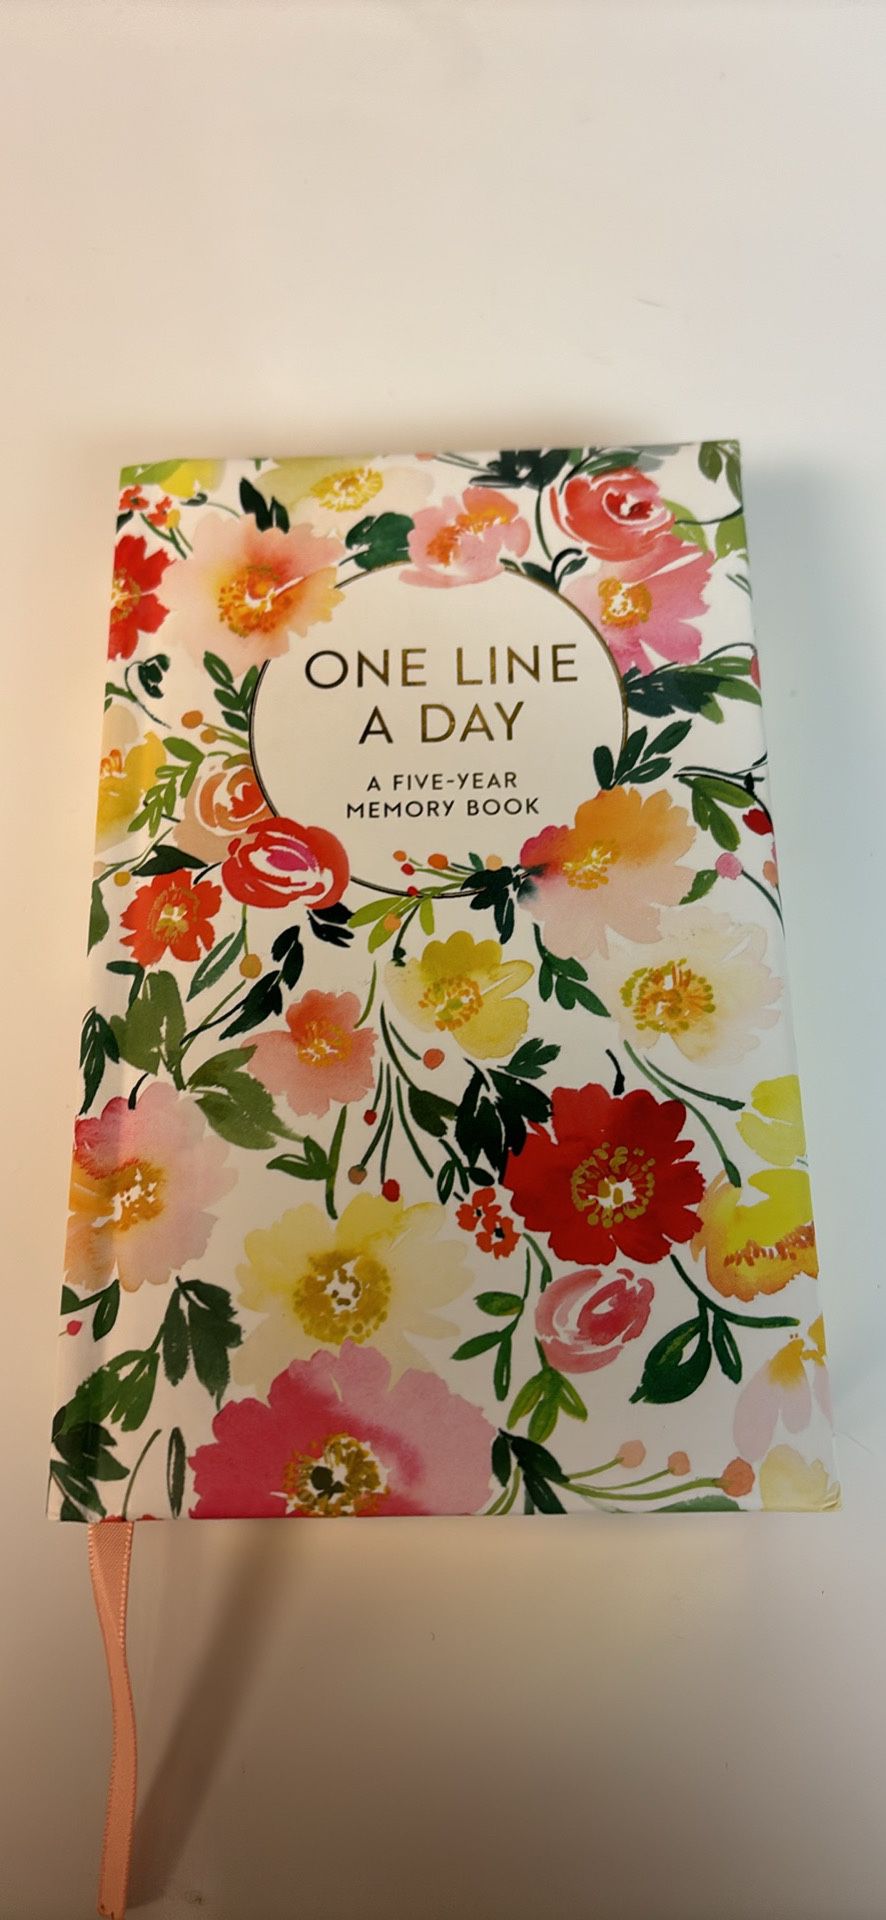 One Line a Day a Five-Year Memory book. hardback.  floral cover.  Yao Cheng, artist, Columbus OH